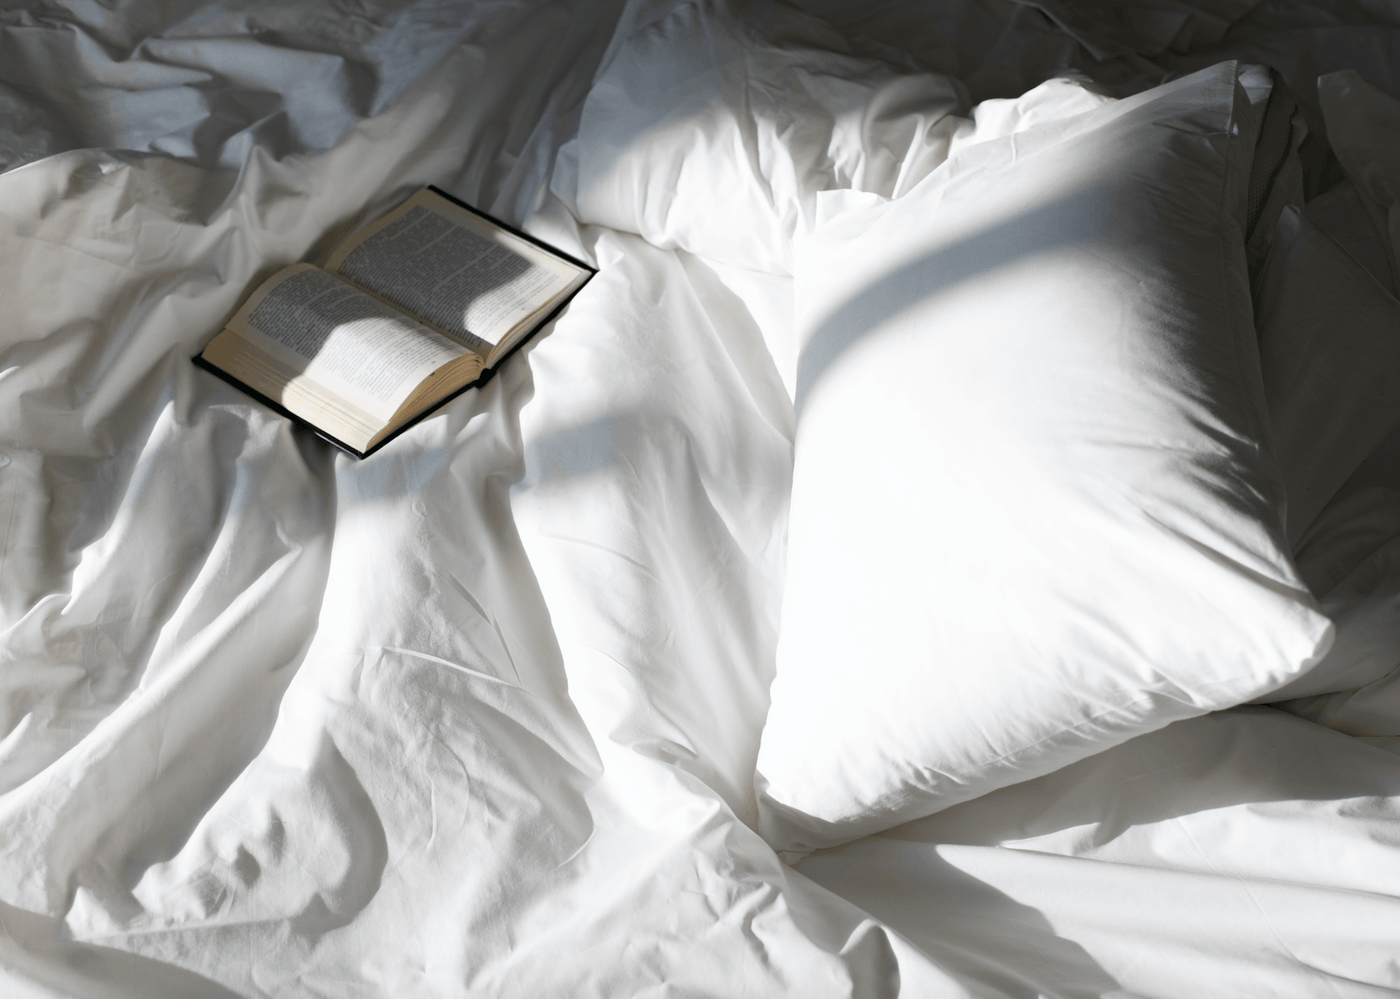 Bed sheet and book - tips for Blemish Free Skin